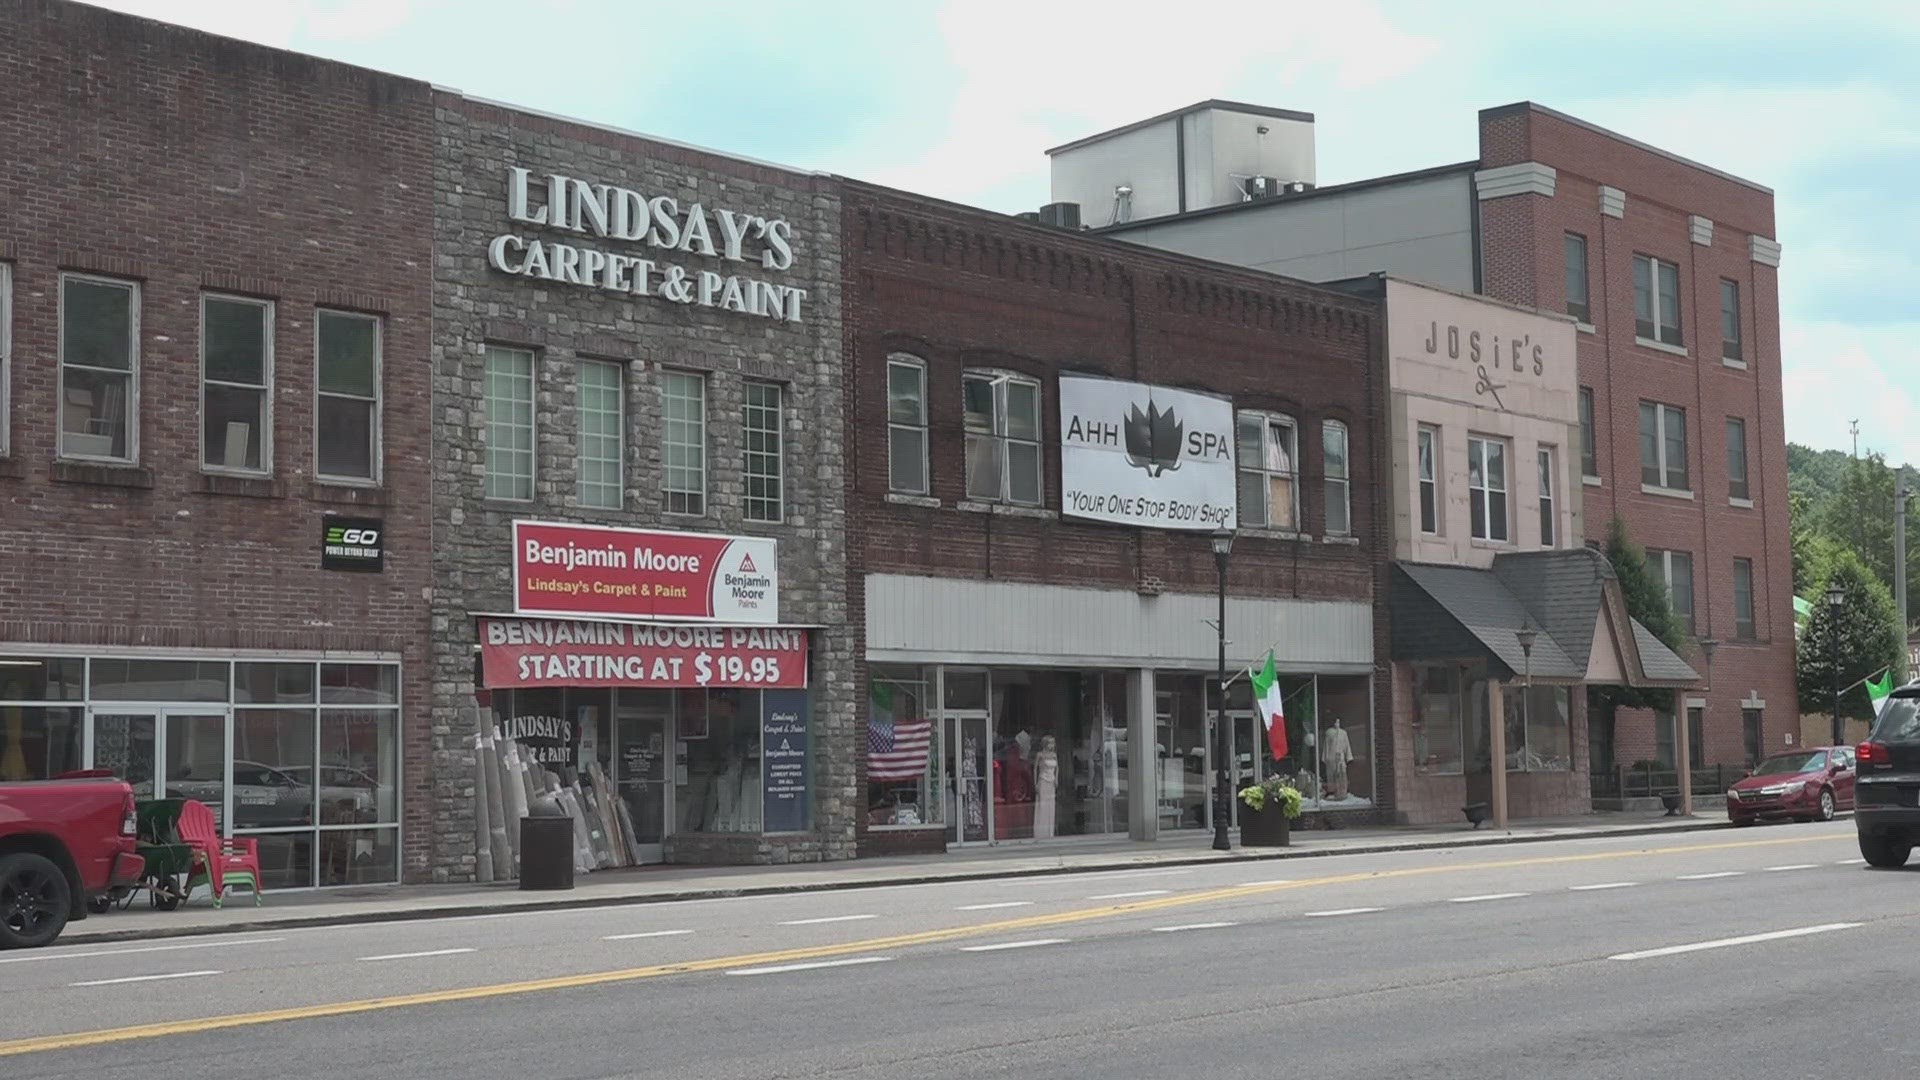 From The Pine Branch to Smith Hardware, LaFollette has plenty of businesses, both old and new.